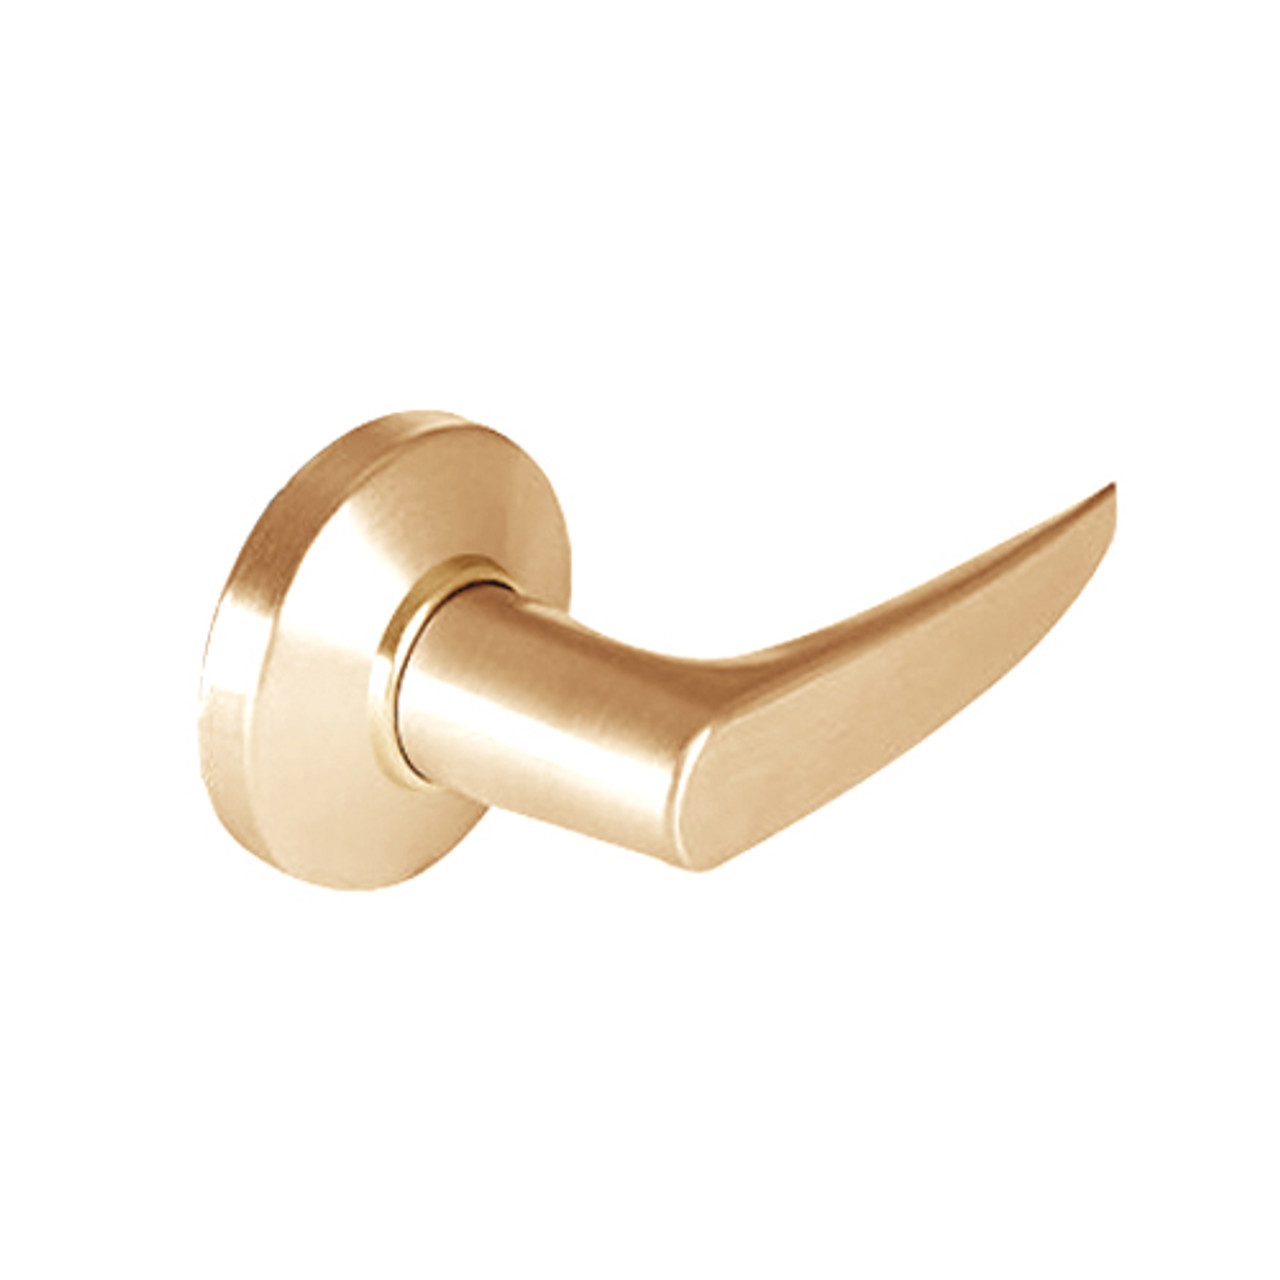 9K30M16CSTK611 Best 9K Series Communicating Heavy Duty Cylindrical Lever Locks with Curved Without Return Lever Design in Bright Bronze